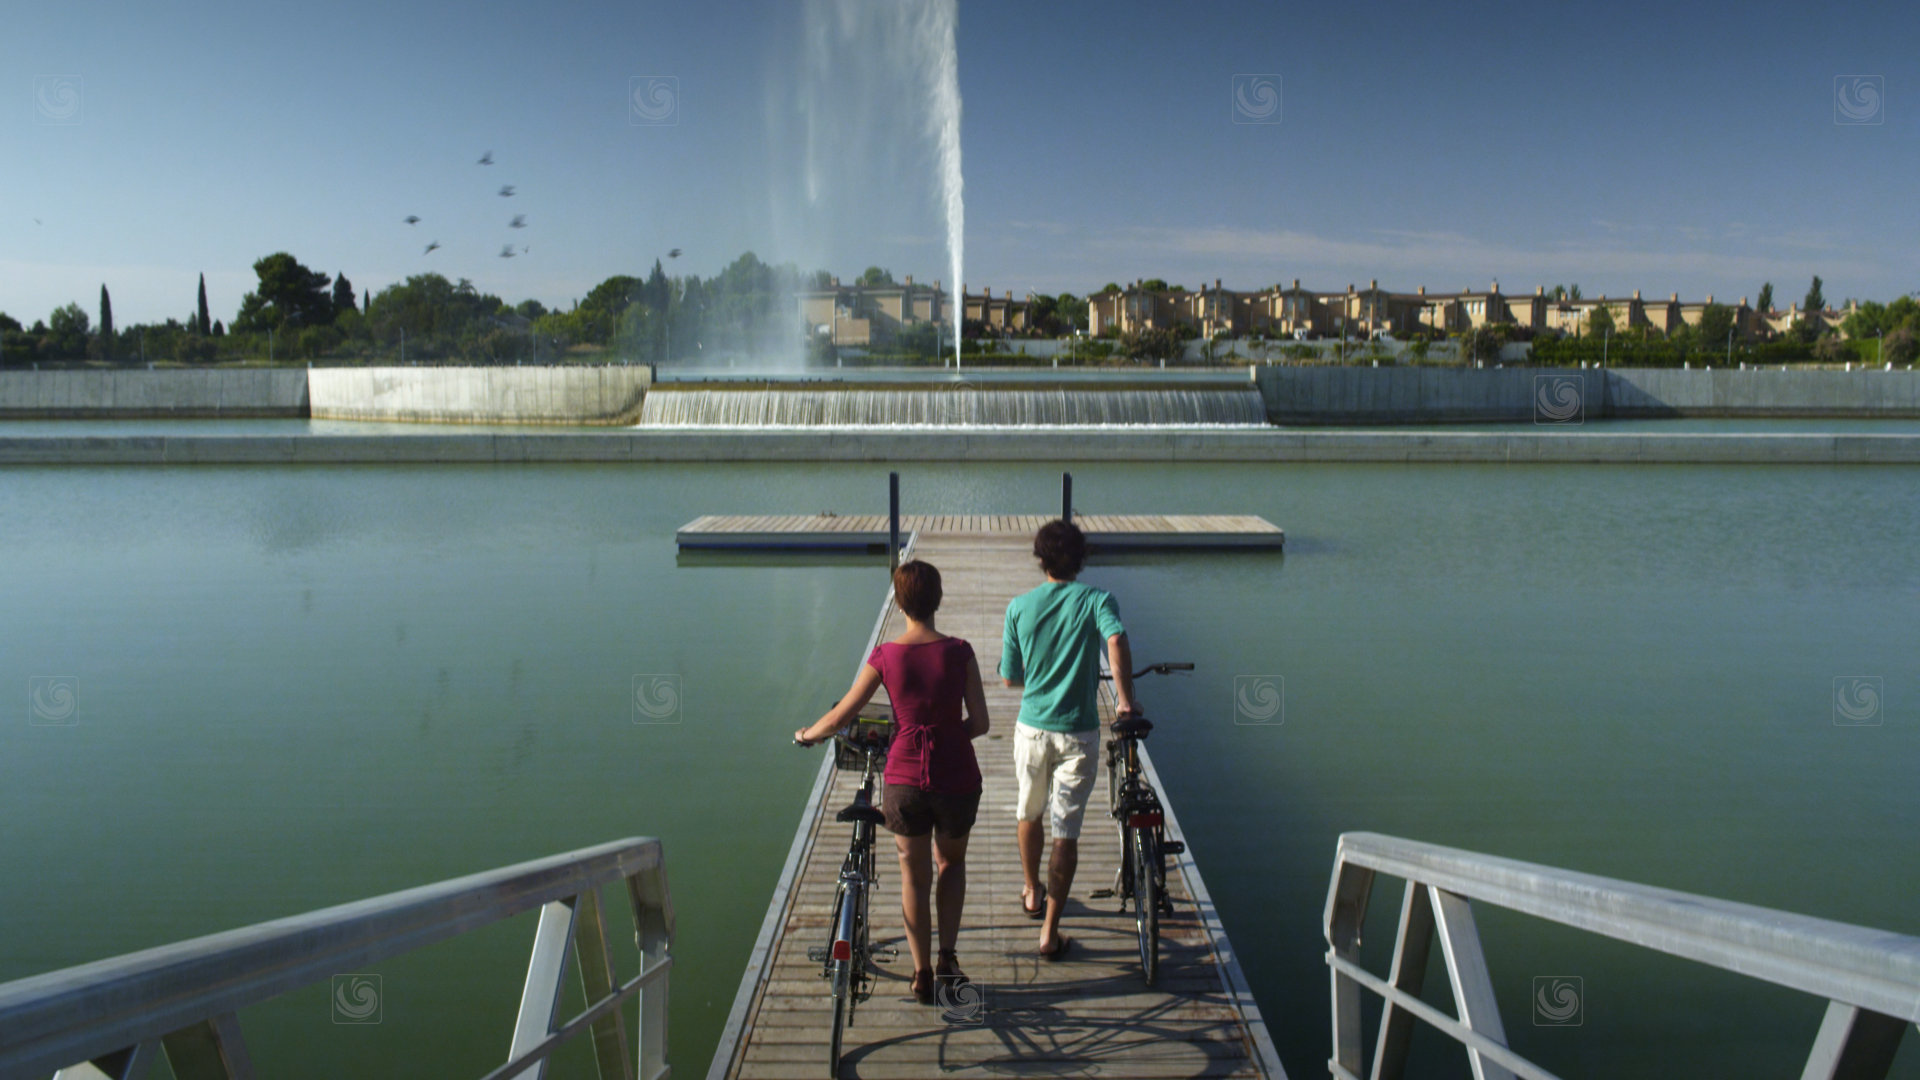 Videoframe from a promotional video of Saragossa, showing a young couple next to an artificial pond